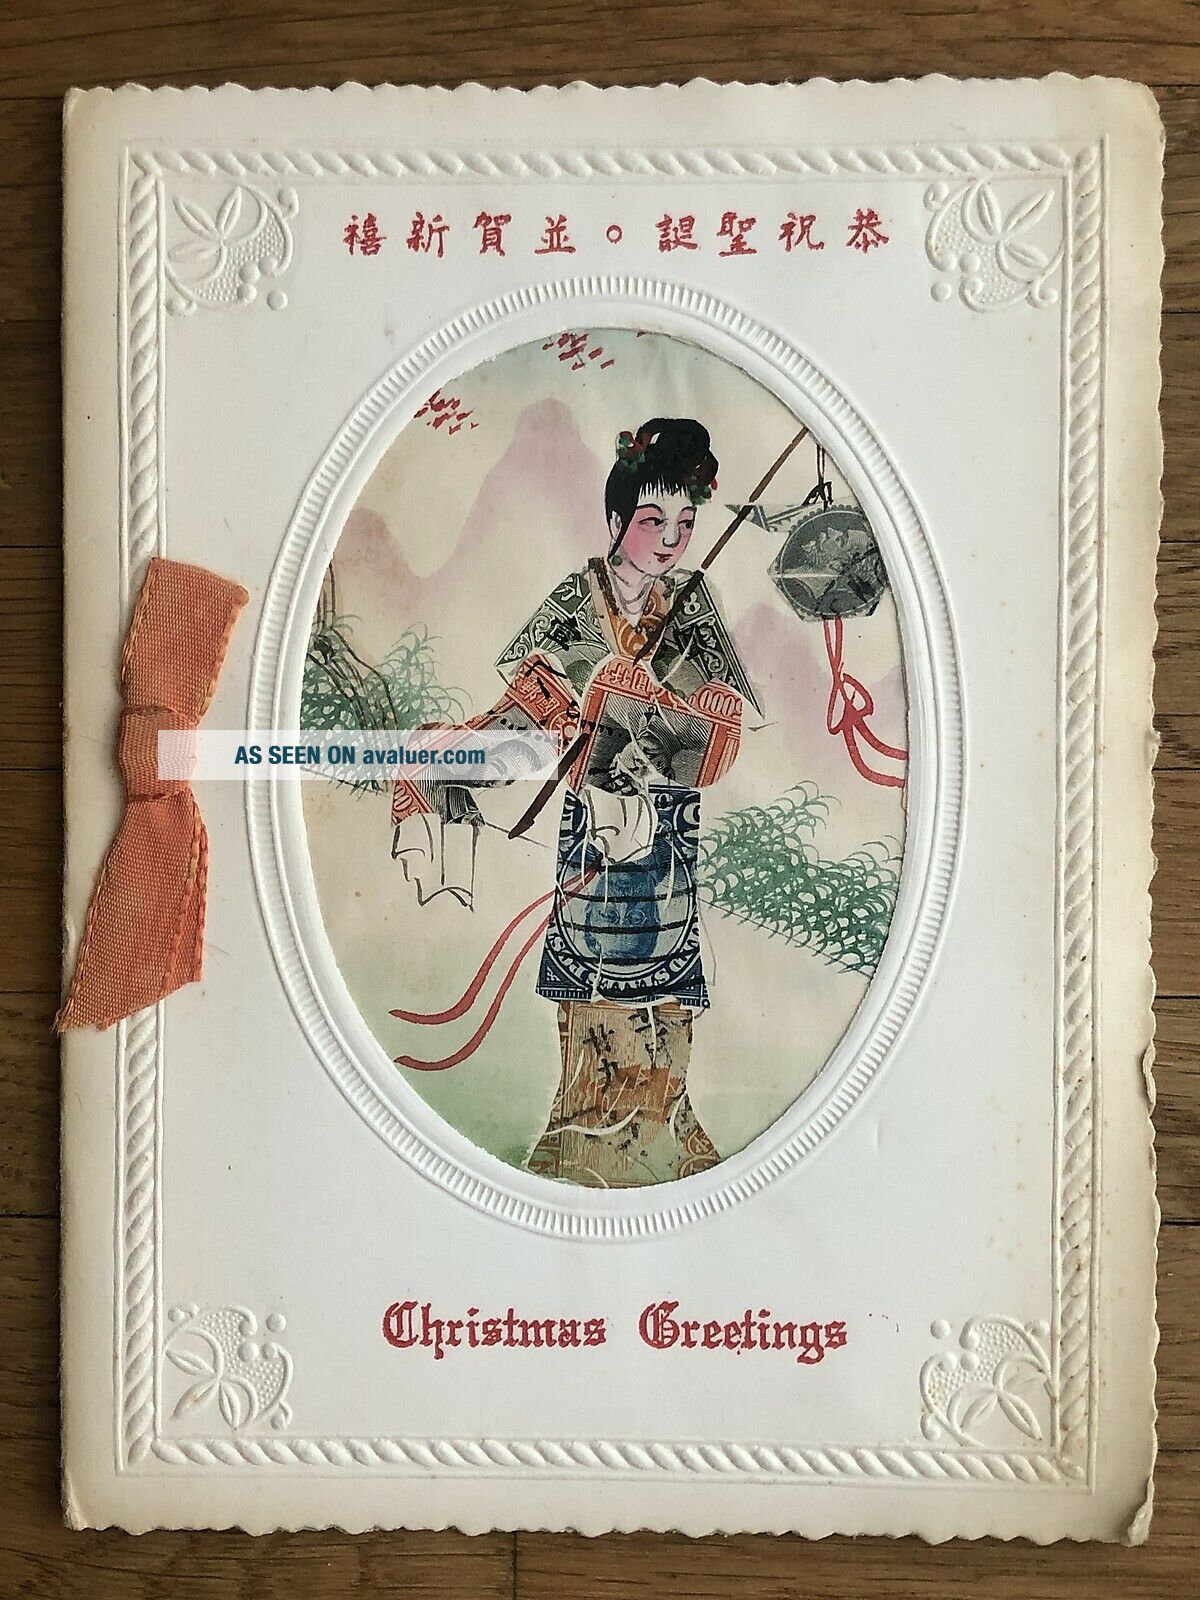 CHINA OLD POSTCARD HAND PAINTED STAMPS CHINESE MISSION CHRISMAS GREETINGS